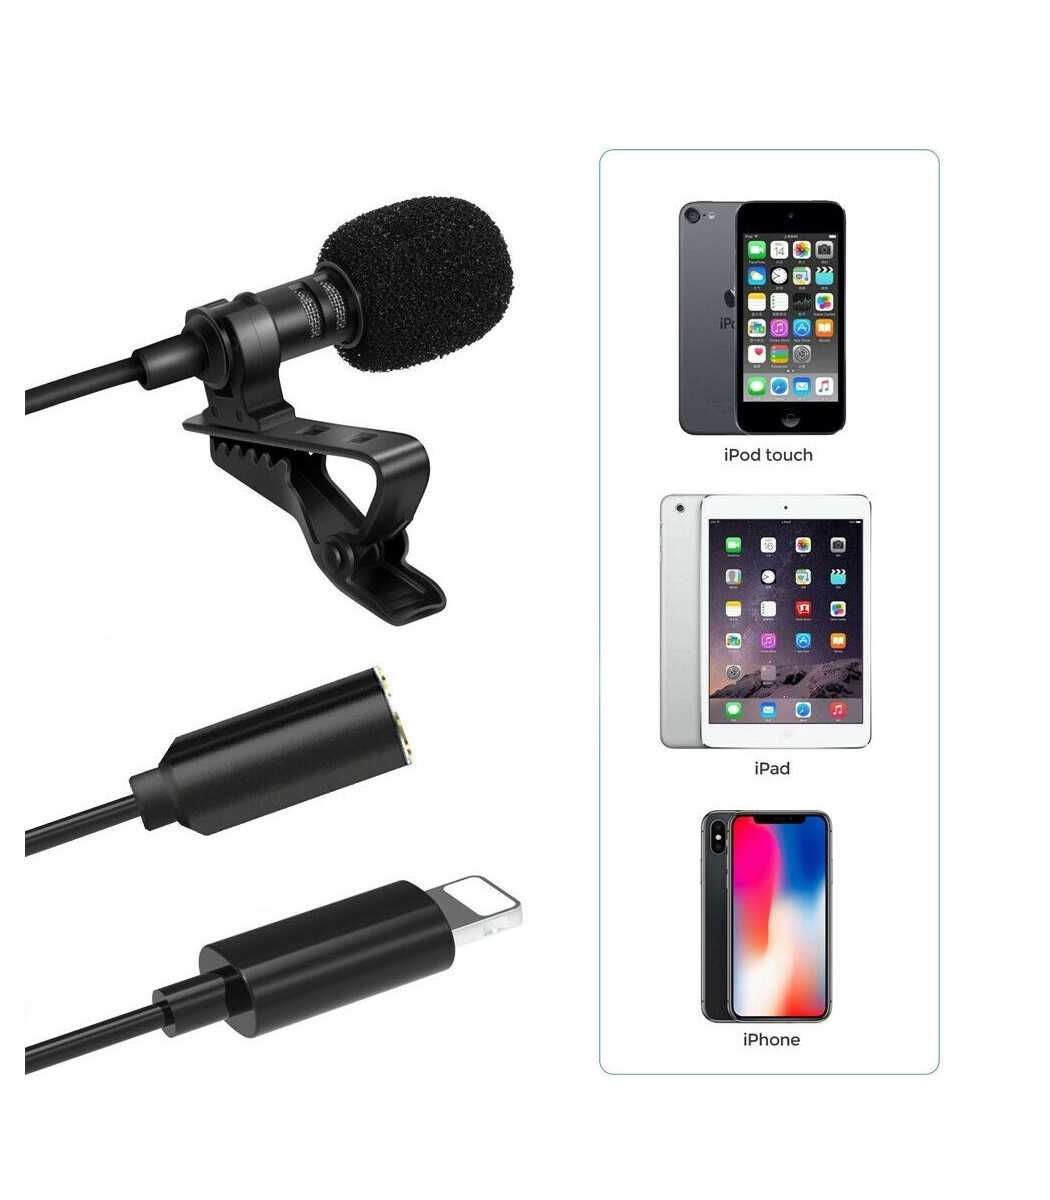 Movo Bundle Featuring The SmartMic Microphone with Lightning Dongle Clip  for iPhone 7, iPhone 7 Plus, iPhone 8, iPhone X, XS, XS Max, 11, 11 Pro,  and